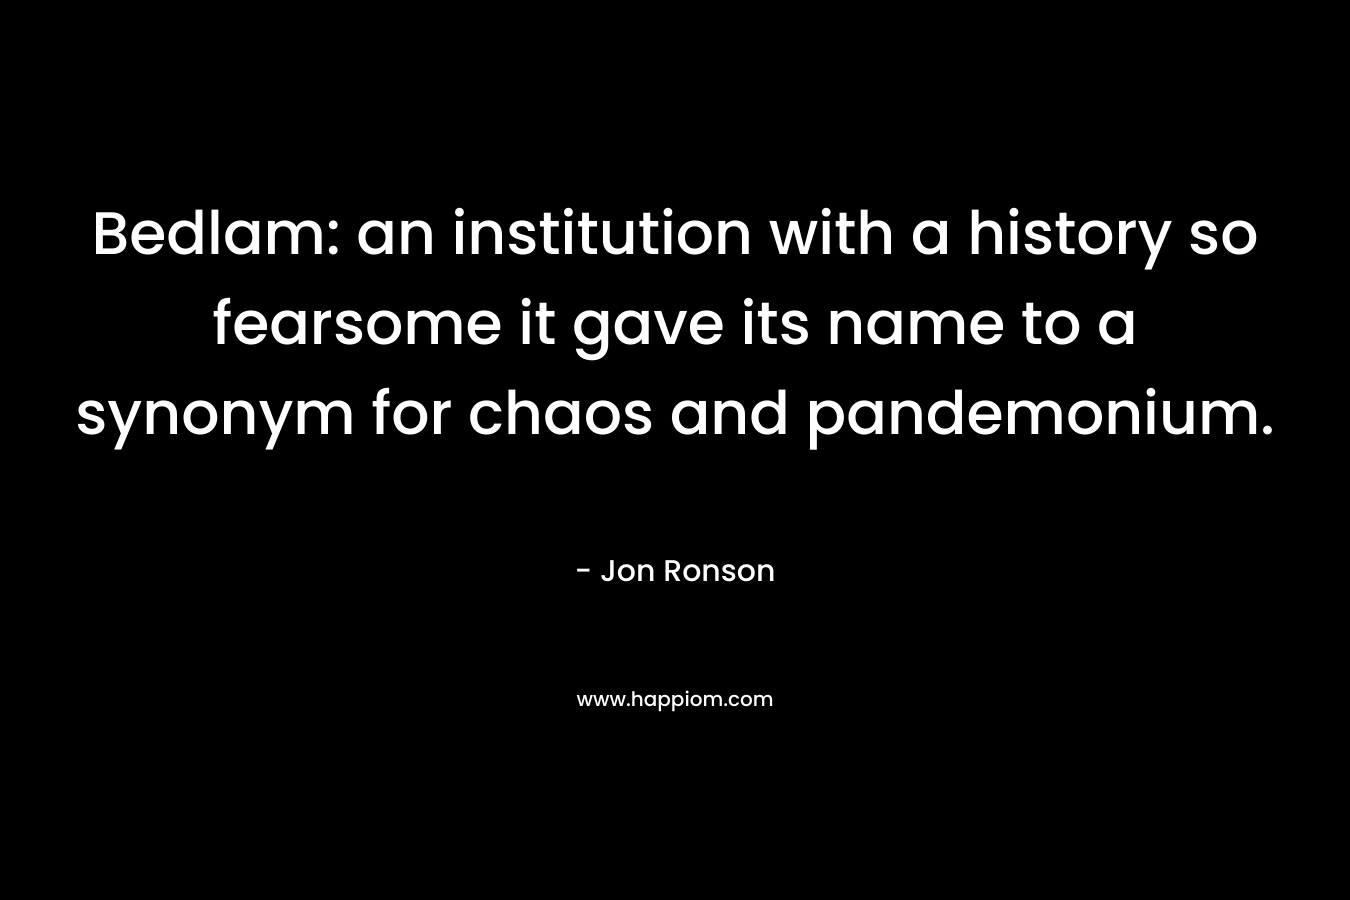 Bedlam: an institution with a history so fearsome it gave its name to a synonym for chaos and pandemonium. – Jon Ronson